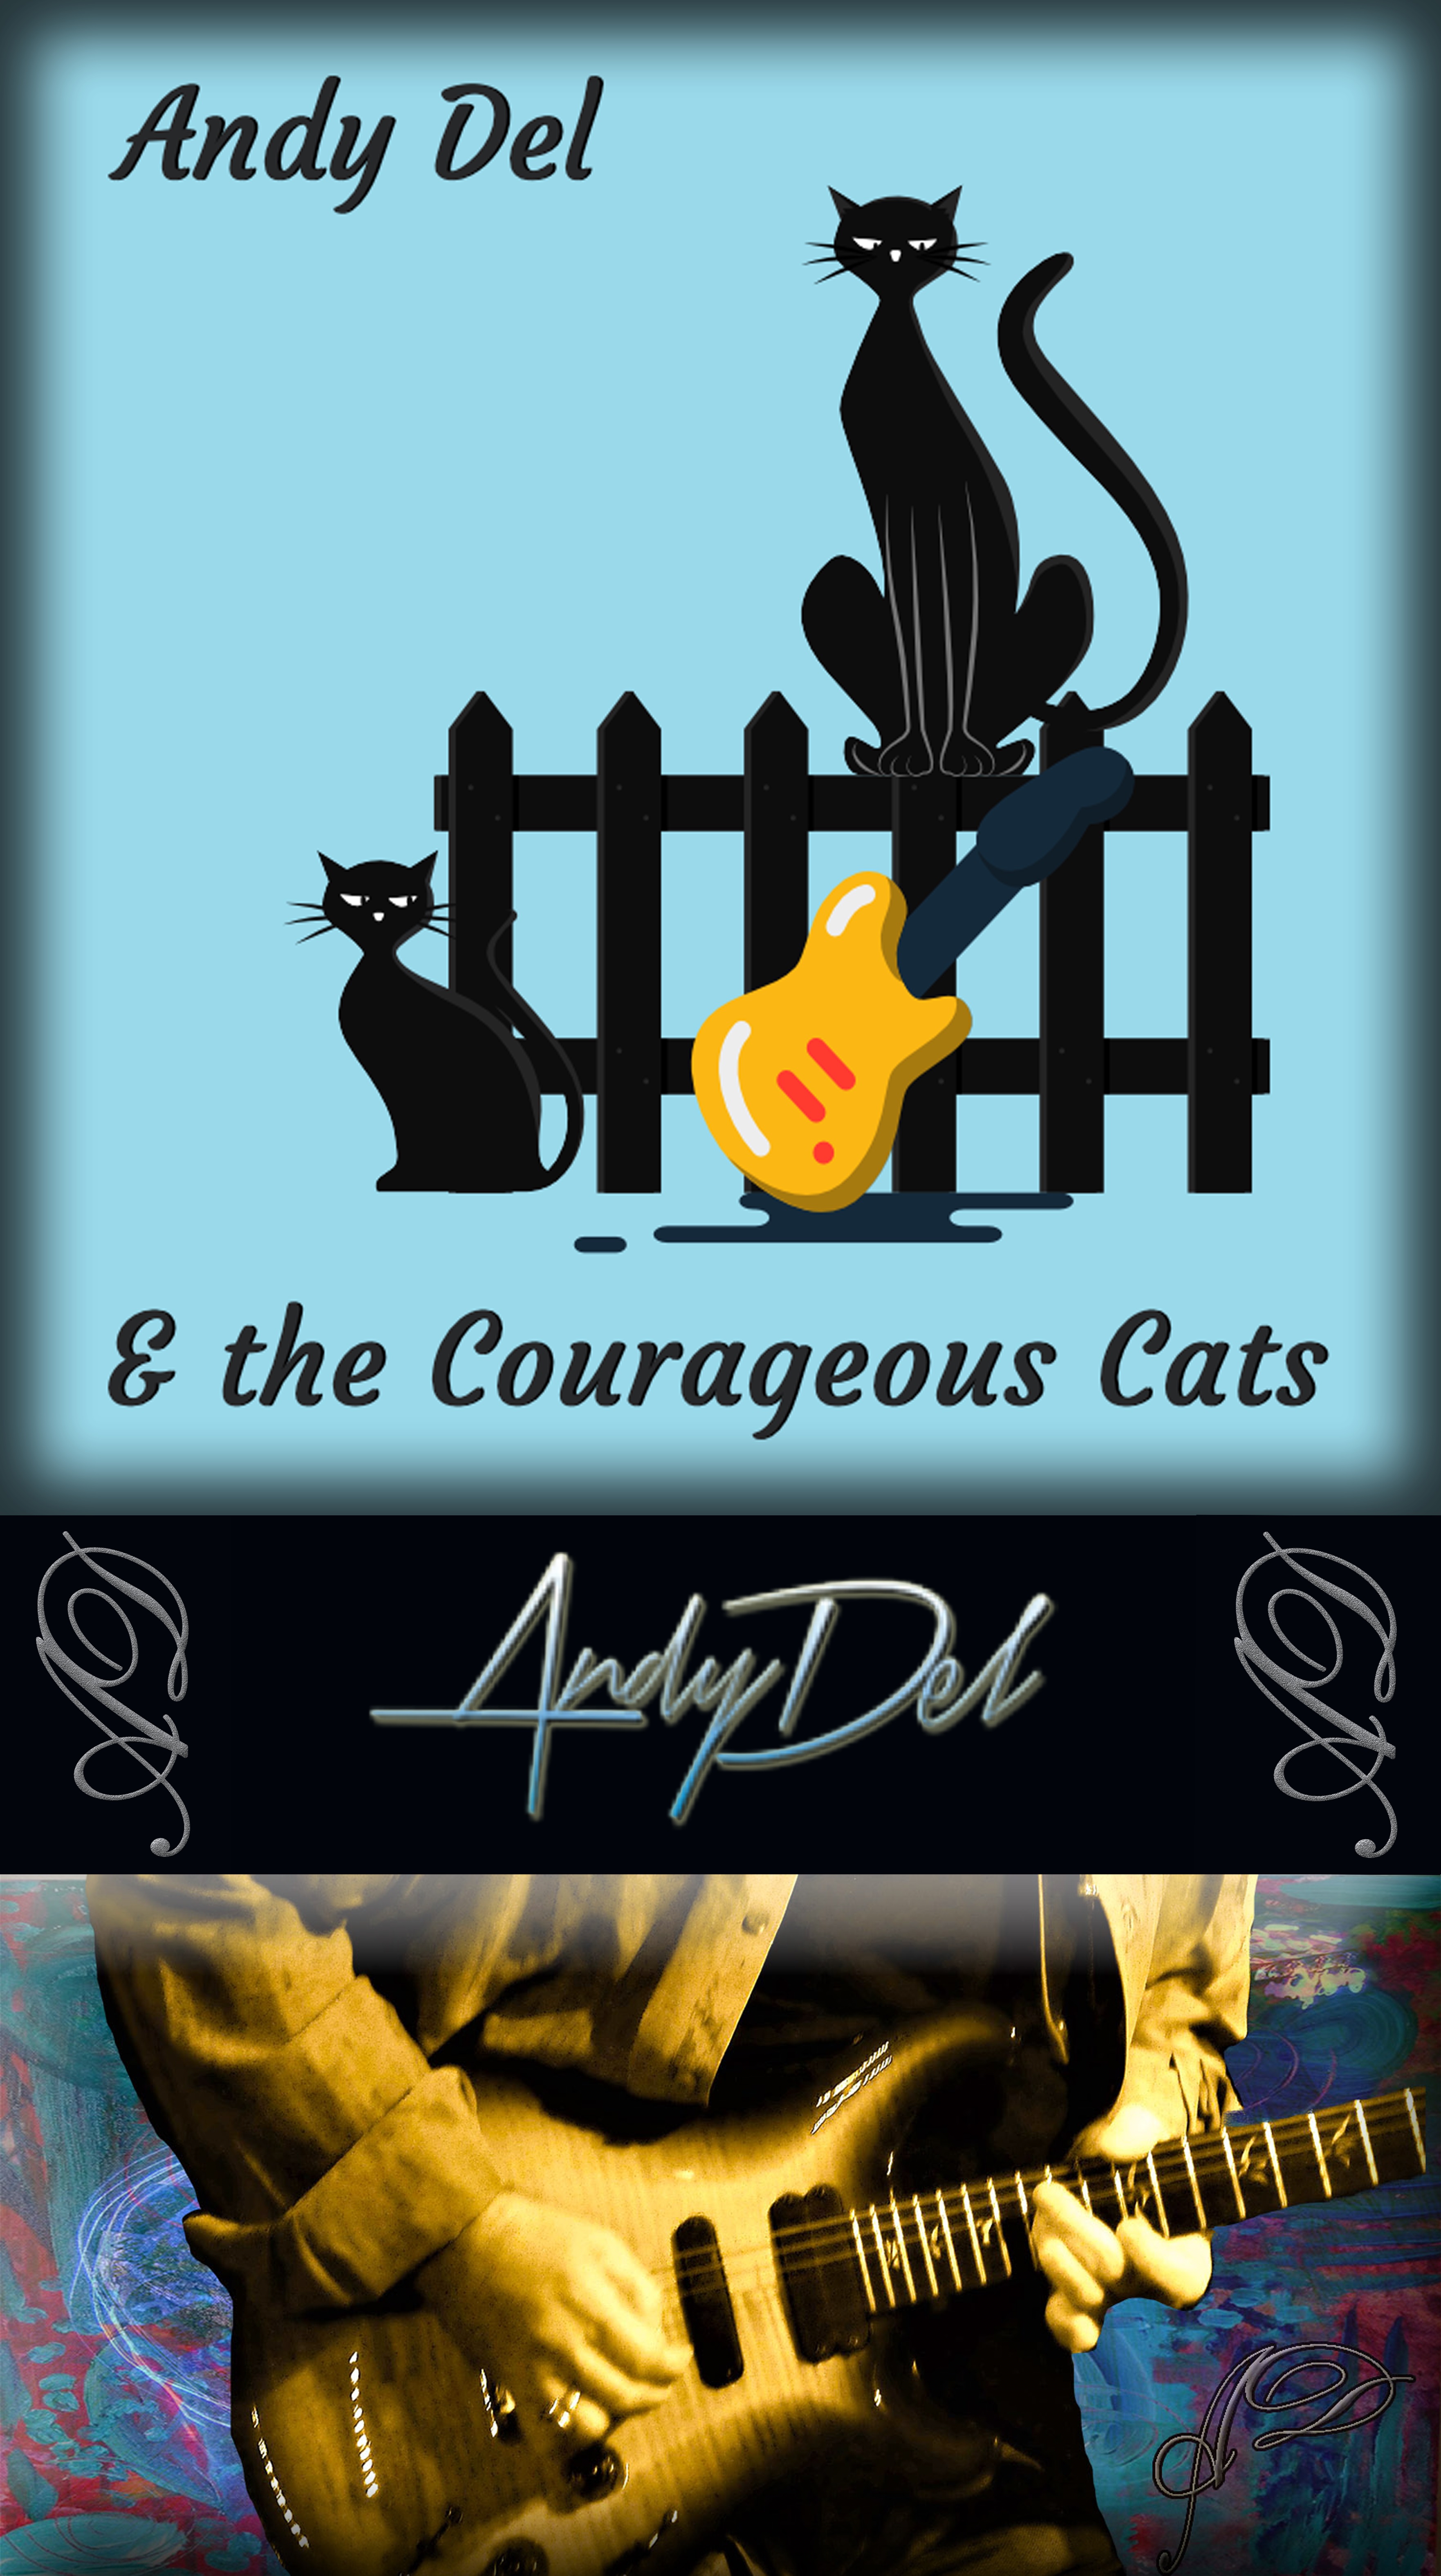 Andy Del and the Courageous Cats at (ANNUAL PRIVATE PARTY) - Saturday, August 3rd